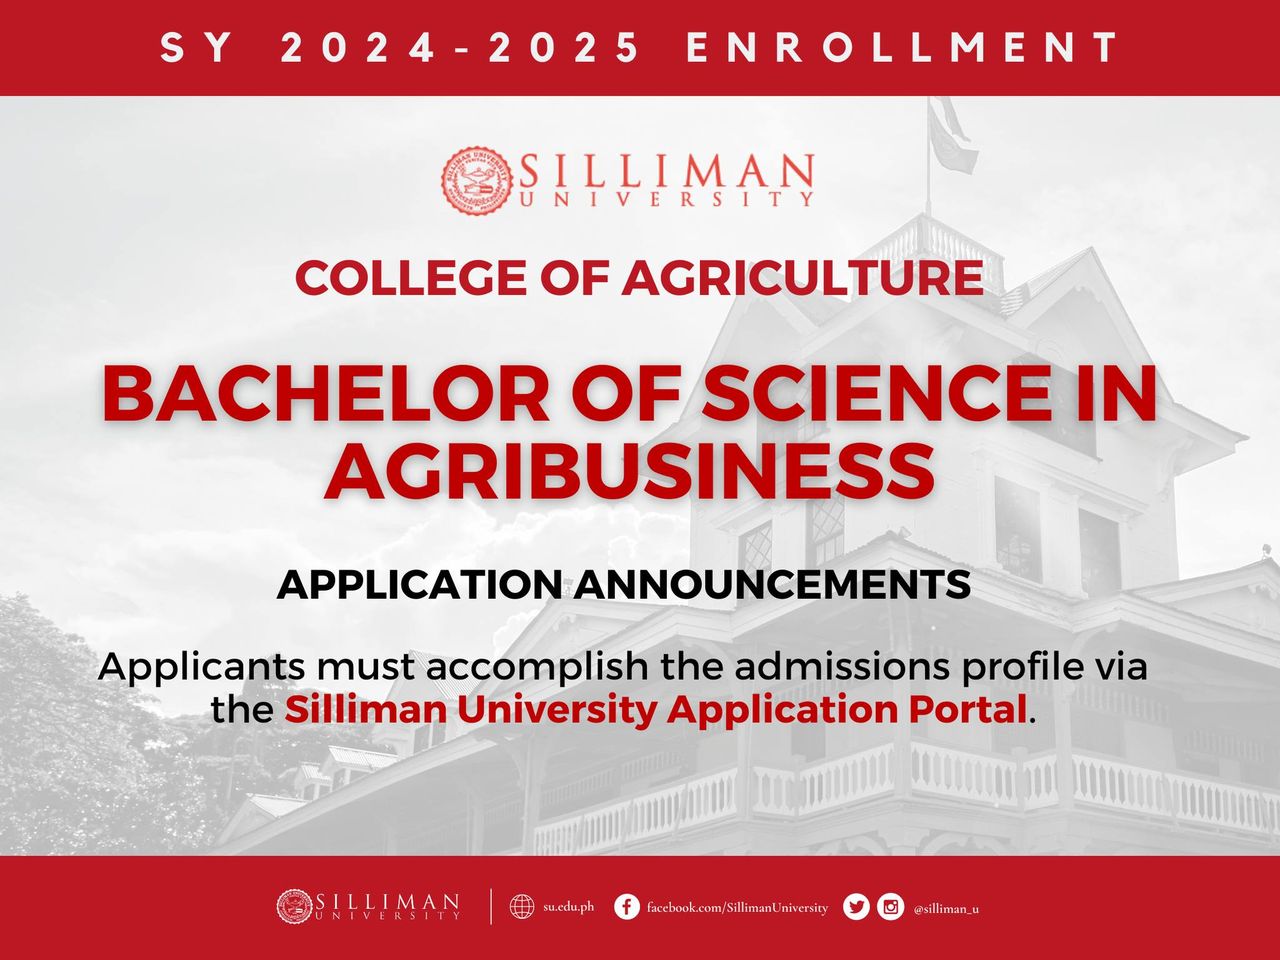 The Silliman University College of Agriculture is now accepting applications for various degrees